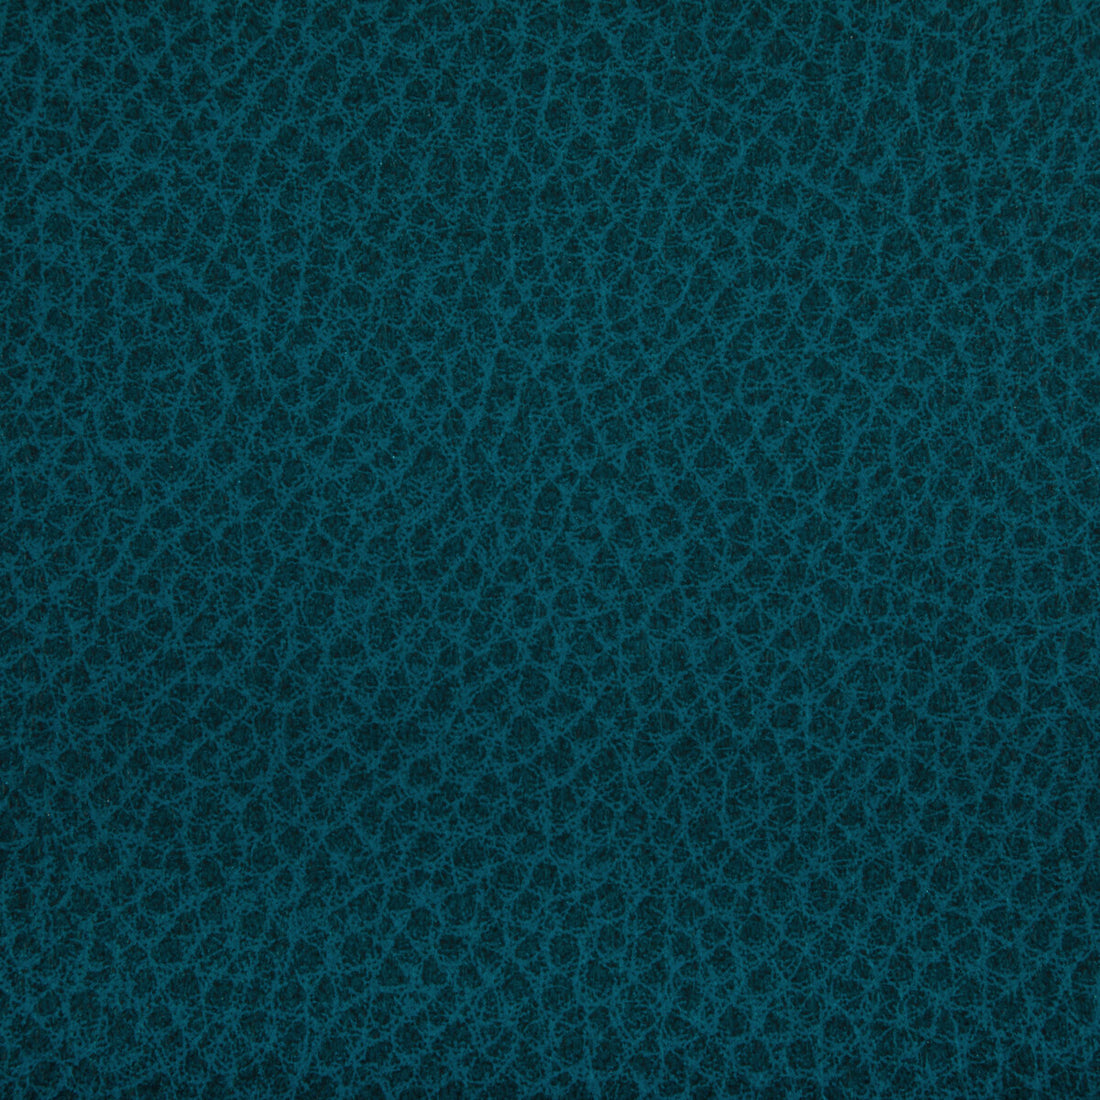 Woolf fabric in grotto color - pattern WOOLF.13.0 - by Kravet Contract